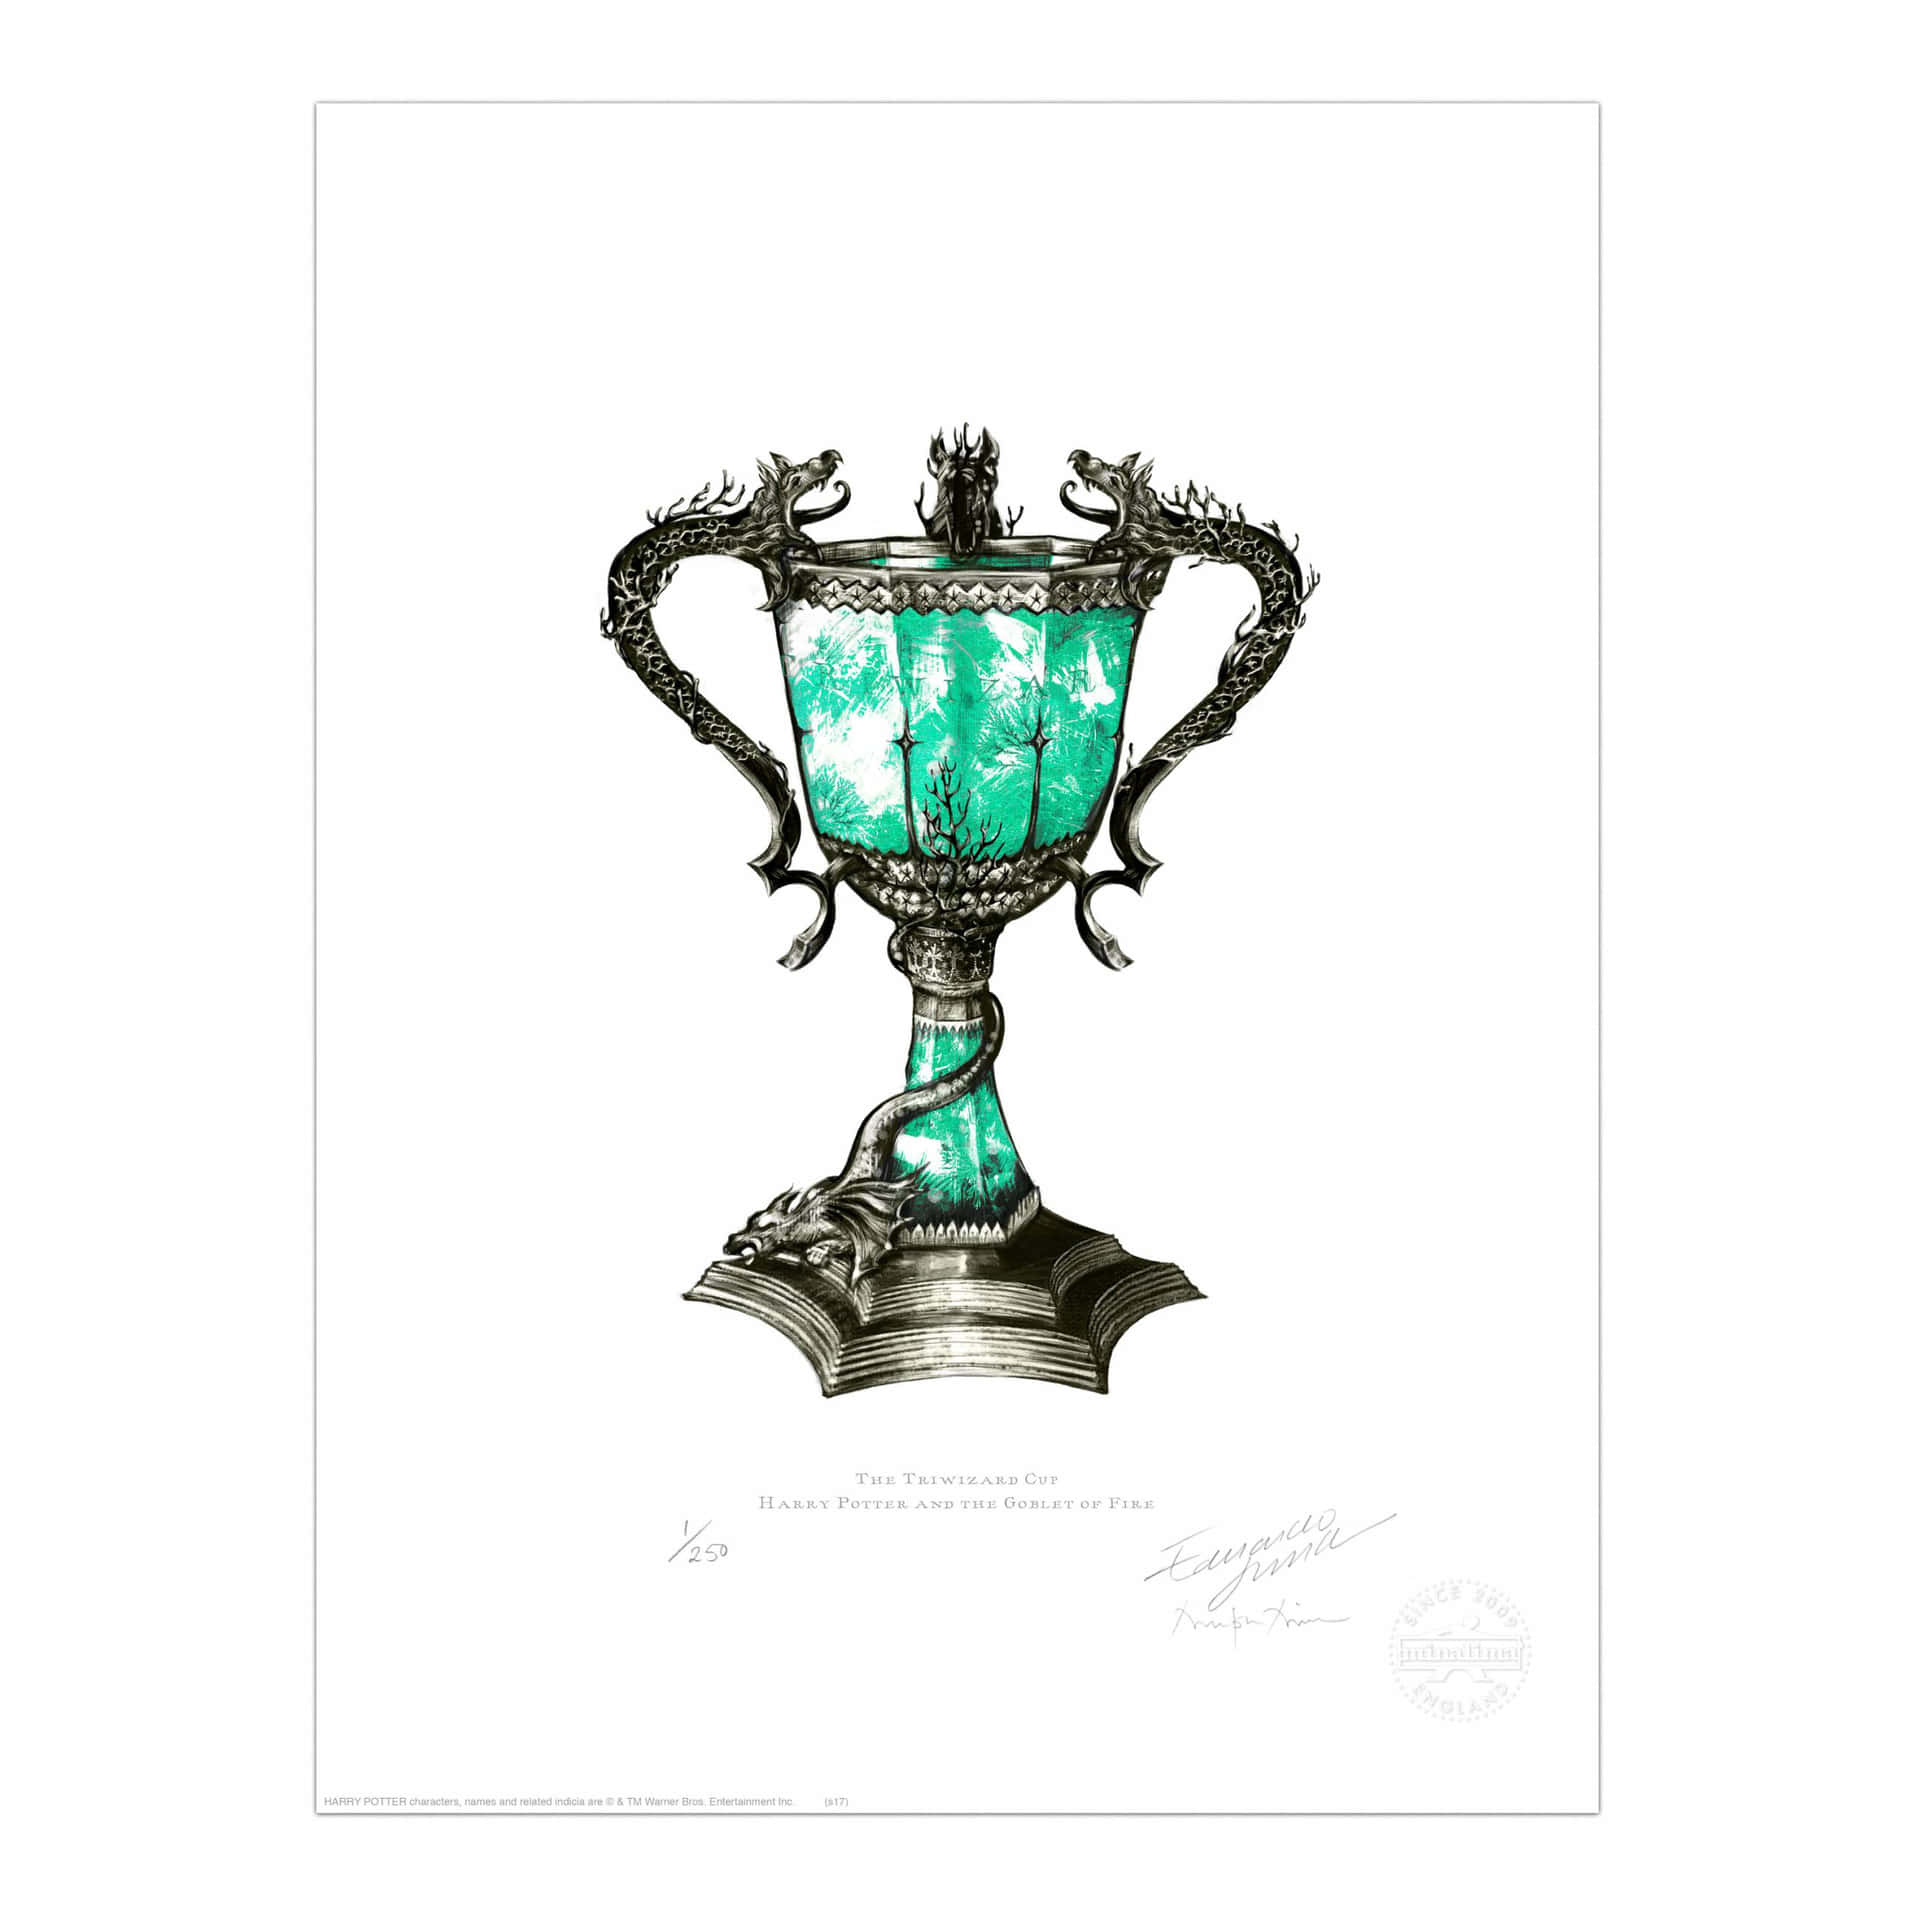 Celebrate your Harry Potter victory with The Triwizard Cup! Wallpaper